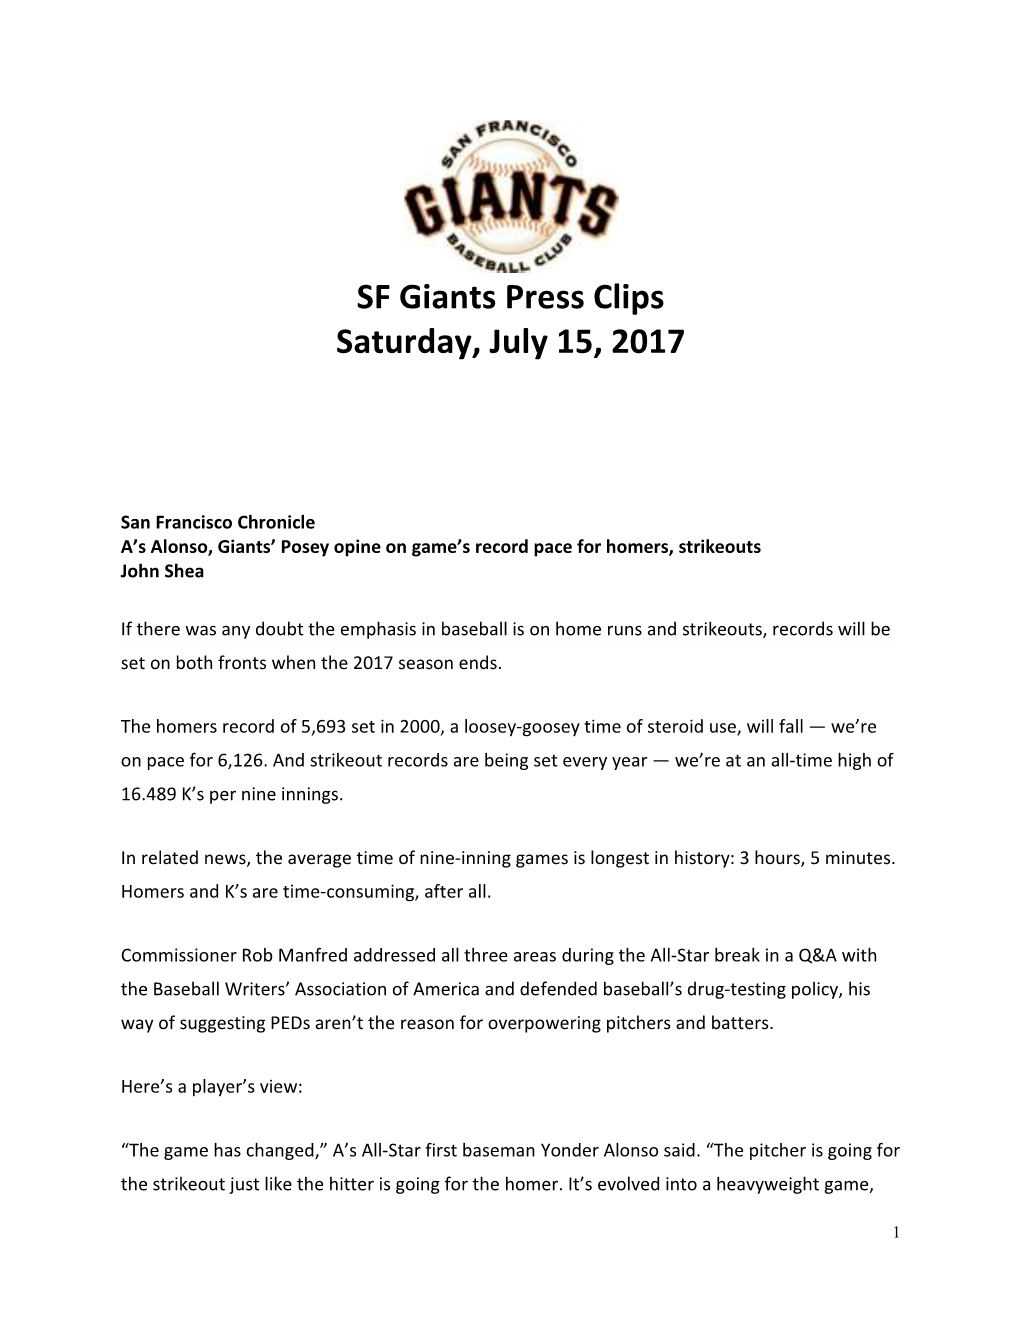 SF Giants Press Clips Saturday, July 15, 2017